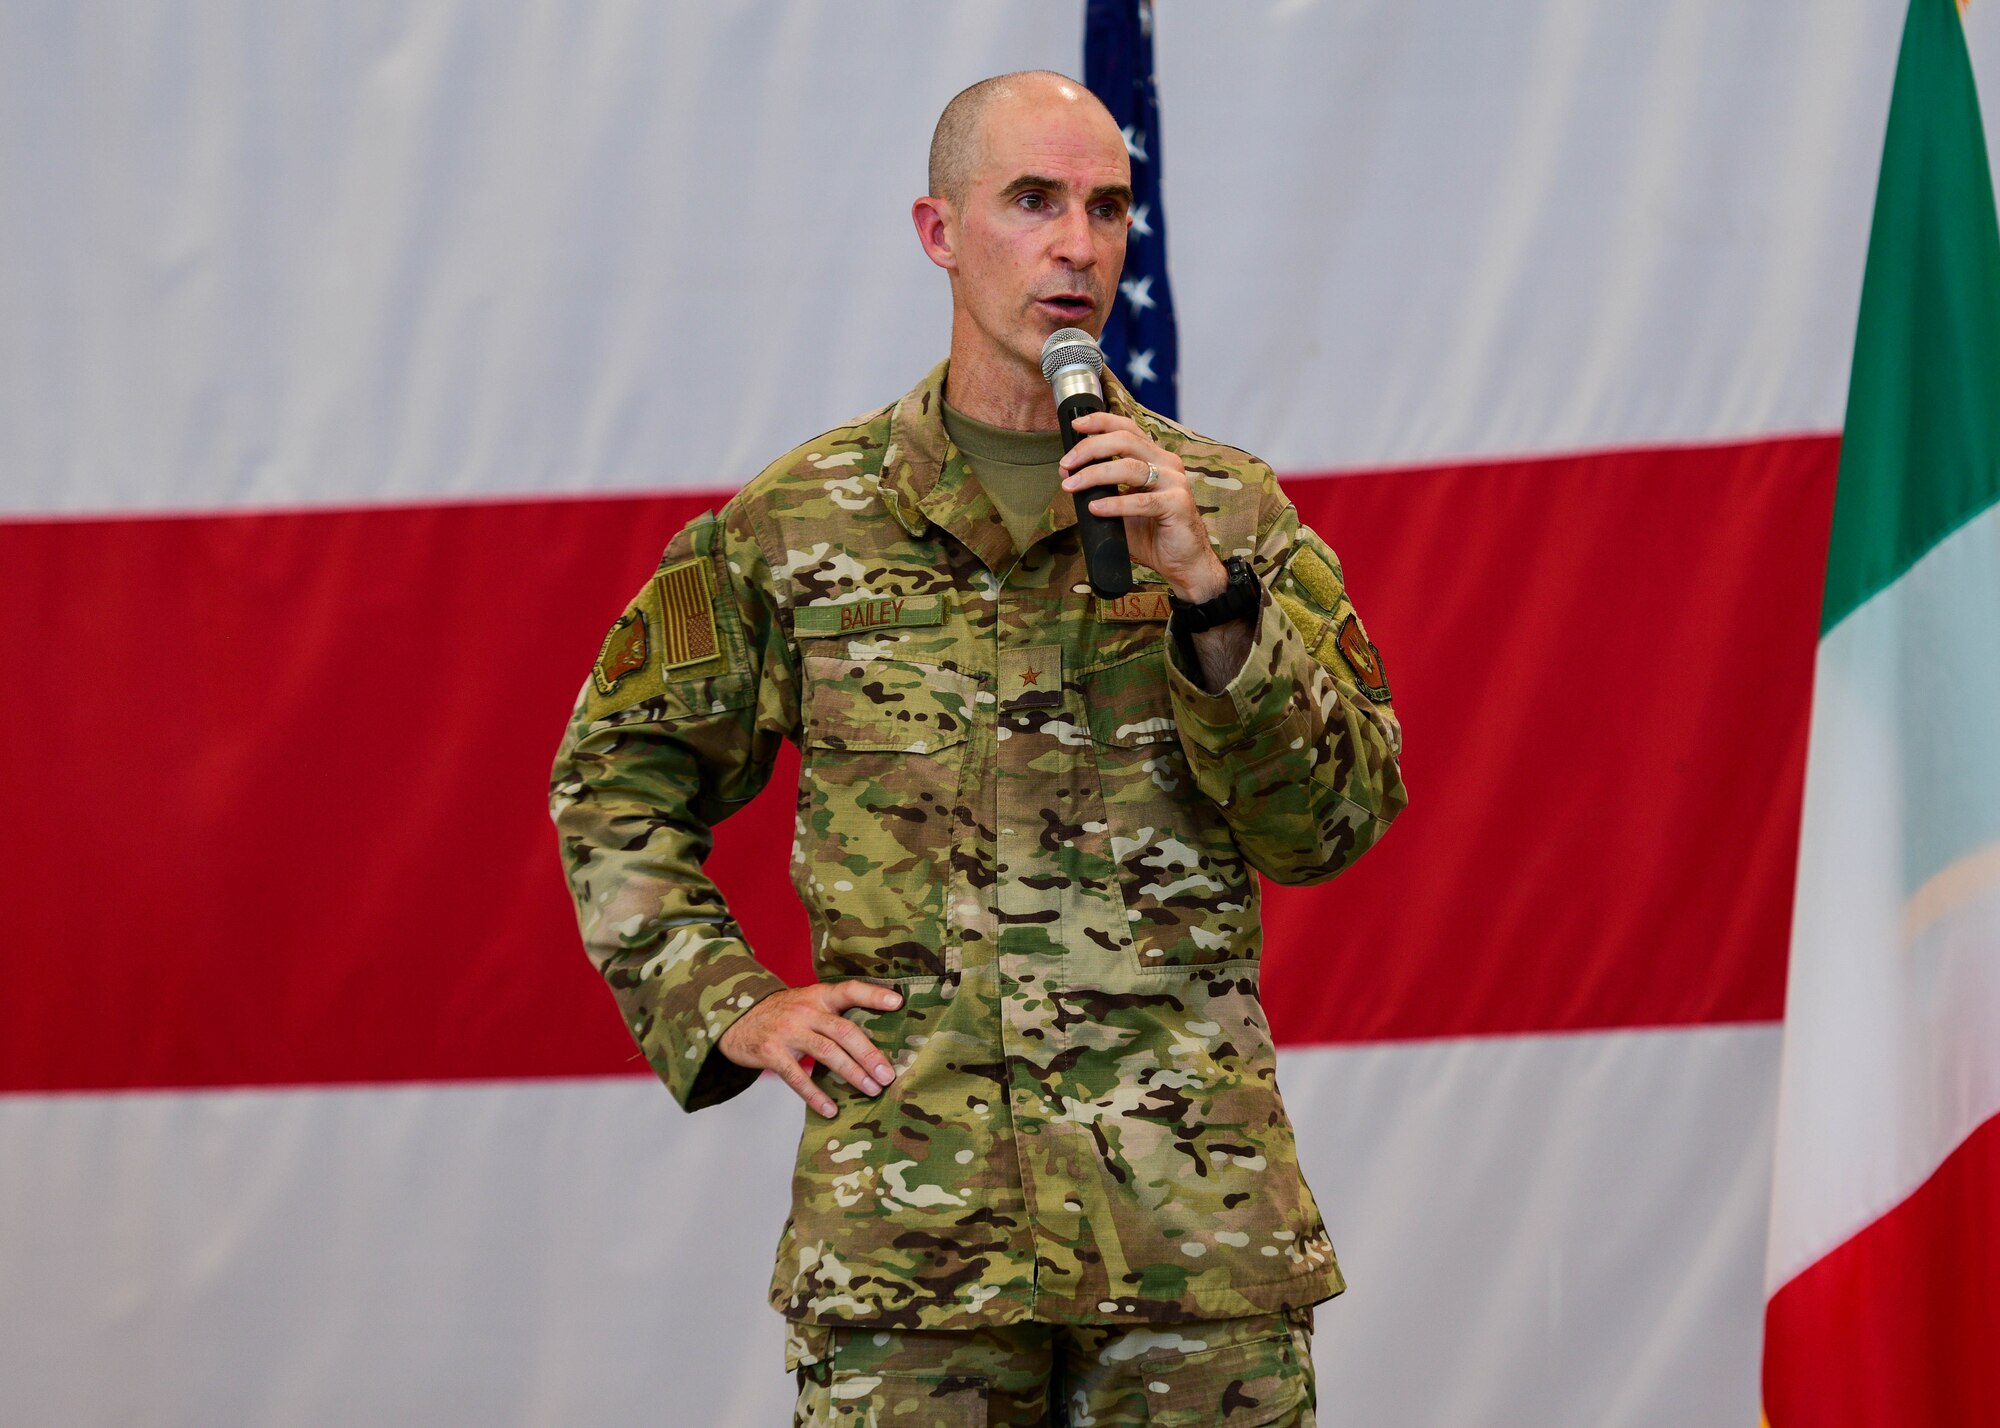 U.S. Air Force Brig. Gen. Jason Bailey, 31st Fighter Wing commander, speaks during his final all-call at Aviano Air Base, Italy, June 30, 2022. Commanders use all-calls to communicate important messages and highlight different accomplishments to the entire base populace. Bailey commands the only permanently assigned U.S. Air Force fighter aircraft wing in NATO’s southern region. (U.S. Air Force photo by Senior Airman Brooke Moeder)